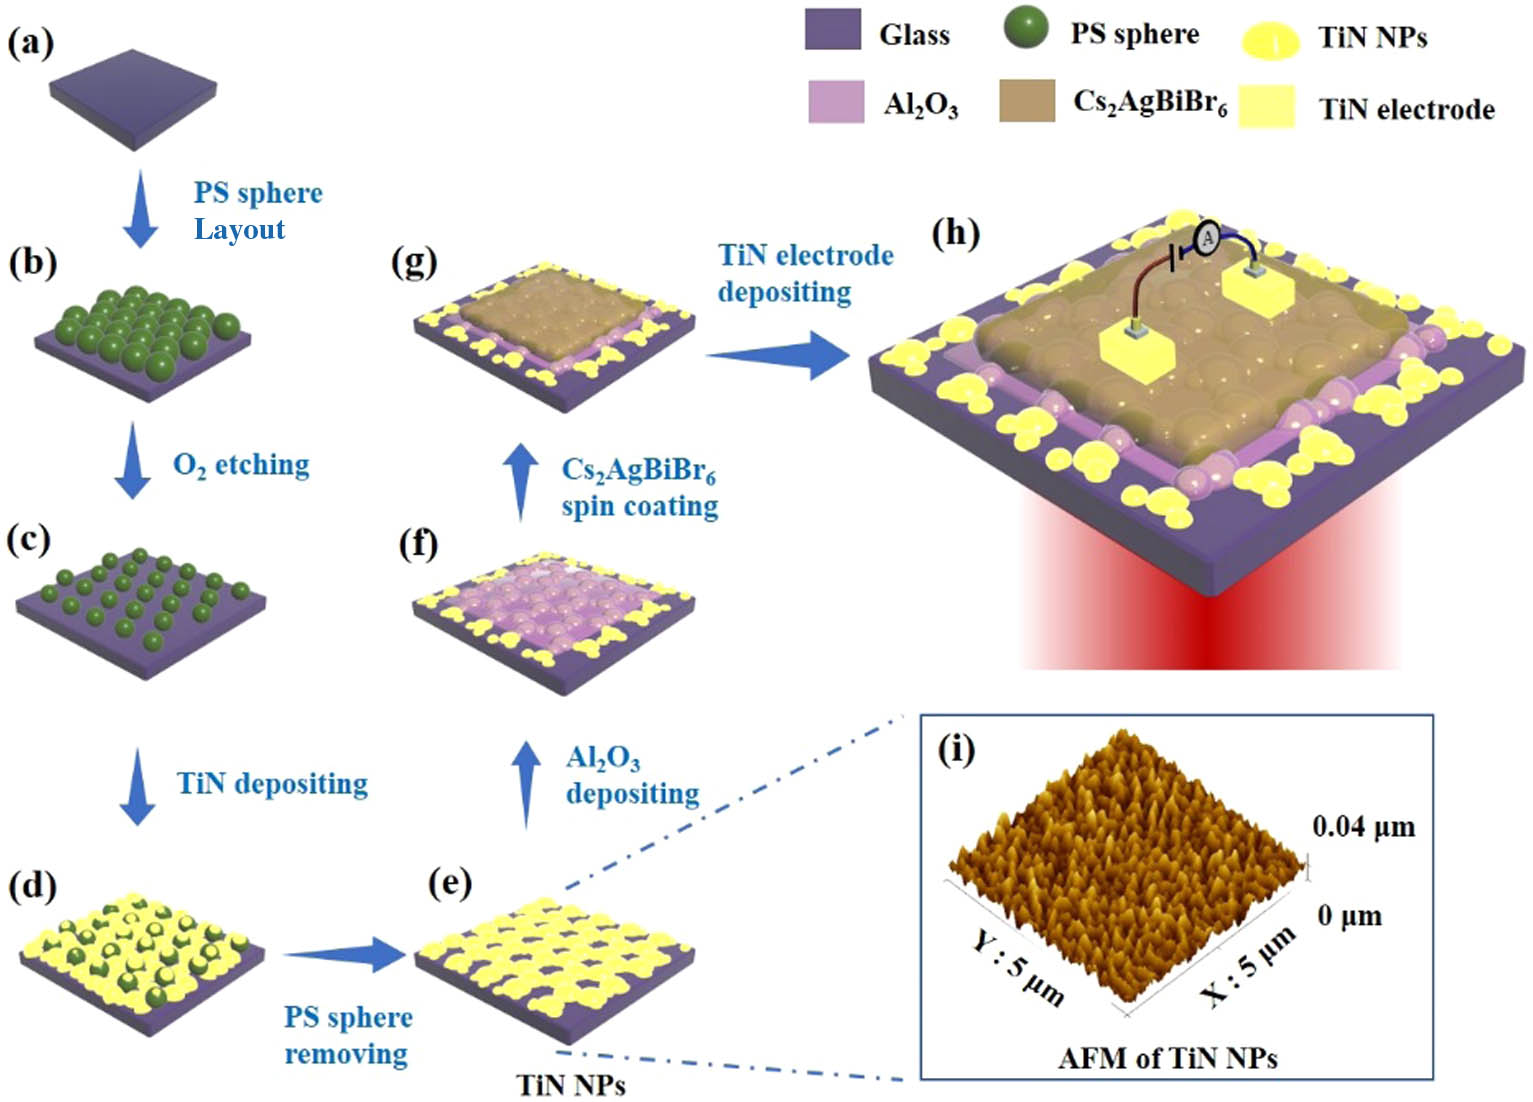 Schematic flow chart illustrating the fabrication process of the plasmonic perovskite Cs2AgBiBr6 PD incorporated with TiN NPs and Al2O3 ultrathin layer. (a) Preparing a hydrophilic glass substrate; (b) forming a single layer of highly ordered closely packed PS nanospheres on glass substrate obtained by self-assembly method; (c) obtaining sparsely distributed PS nanosphere array by the RIE method; (d) depositing a TiN layer with a thickness of 40 nm by the RF magnetron sputtering method; (e) obtaining TiN NP array on the glass substrate after removing PS spheres; (f) depositing an ultrathin Al2O3 layer on the above formed TiN NPs by ALD; (g) spin coating the Cs2AgBiBr6 thin film on the Al2O3 interfacial layer; and (h) sputtering TiN electrodes with a thickness of 80 nm on Cs2AgBiBr6 using a copper mesh as the mask. In (h), the light is incident on the PD from the glass side. (i) 3D AFM image of the obtained TiN NPs.